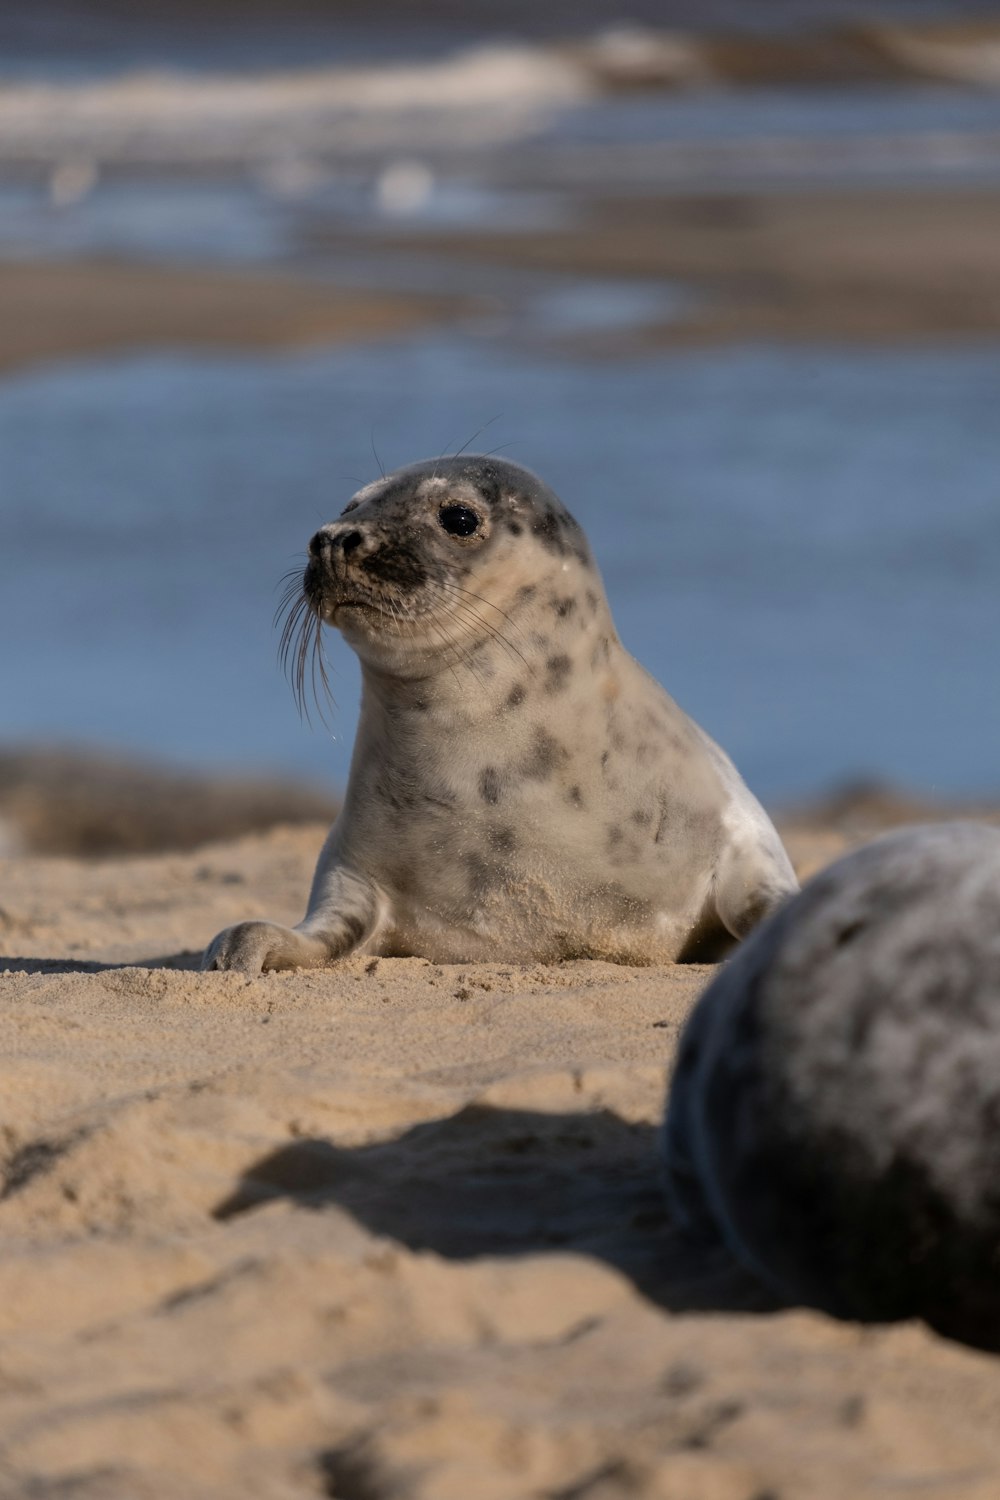 a seal on a beach near a body of water